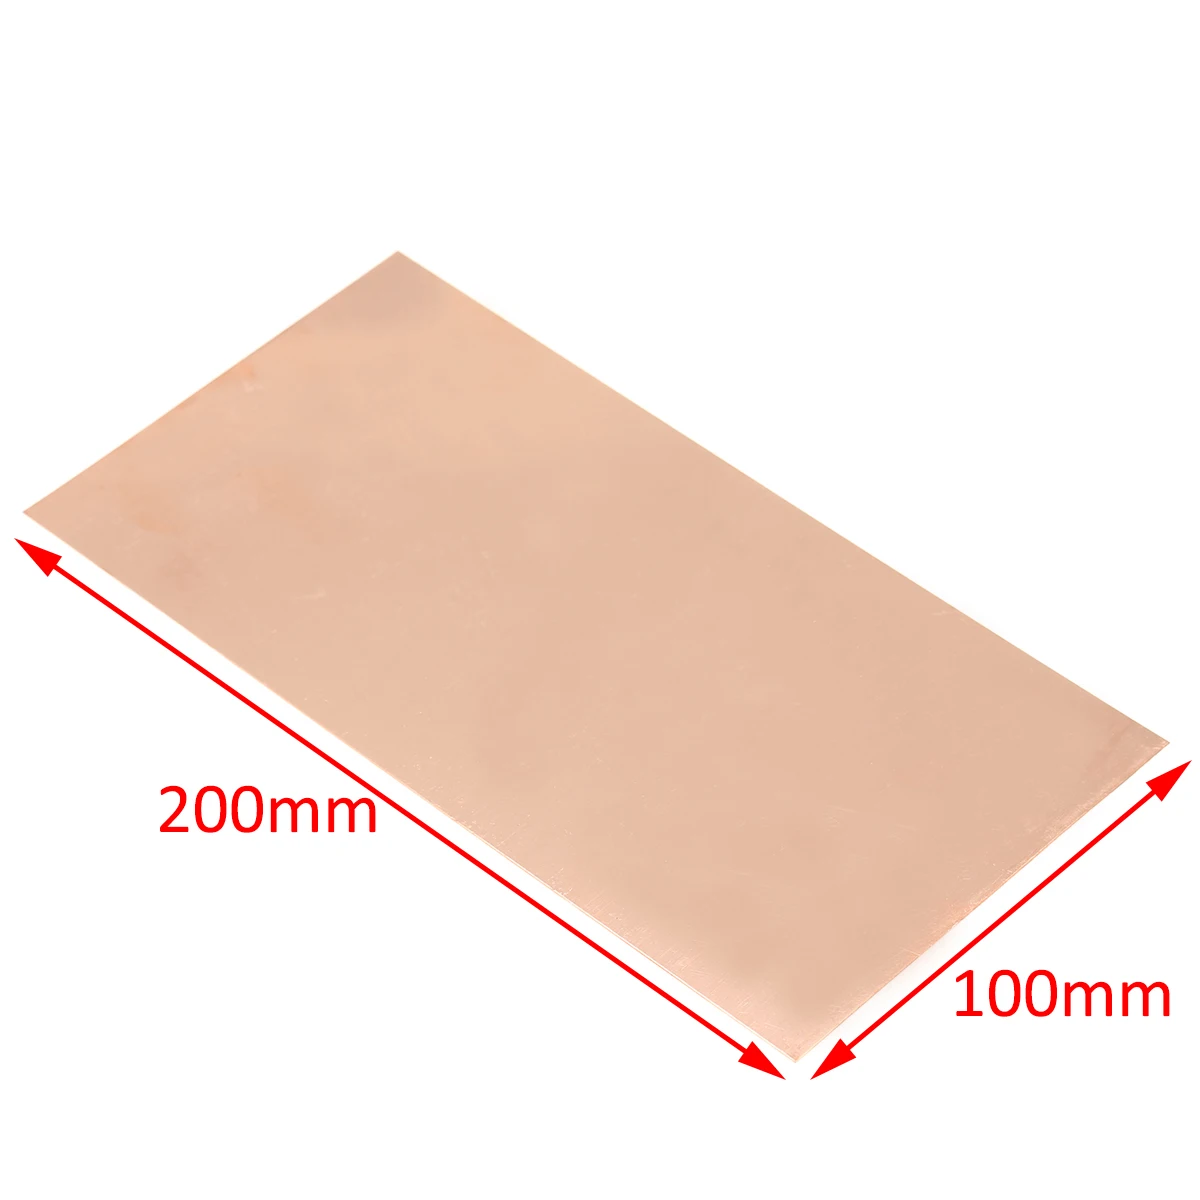 1pc High Purity Copper Cu Metal Sheet Plate Foil Panel 100x200x0.5mm Mayitr For Power Tool